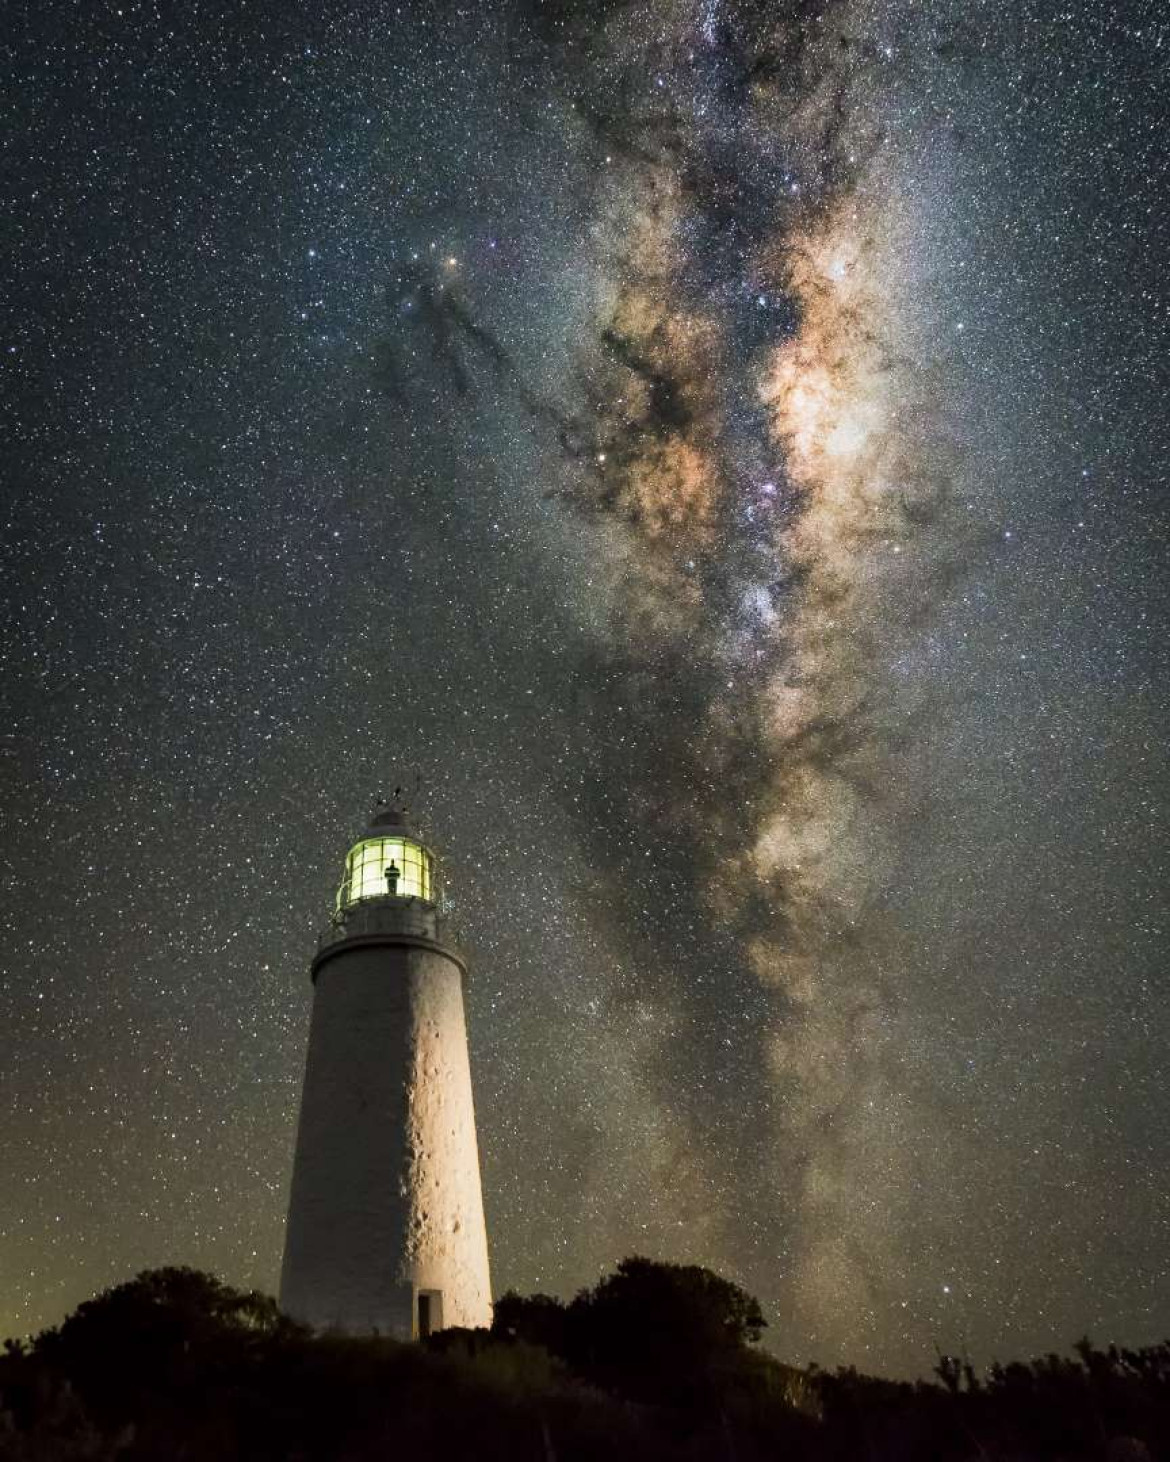 fot. James Stone, "Keeper of the Light" / Insight Investment Astronomy Photographer of the Year 2018